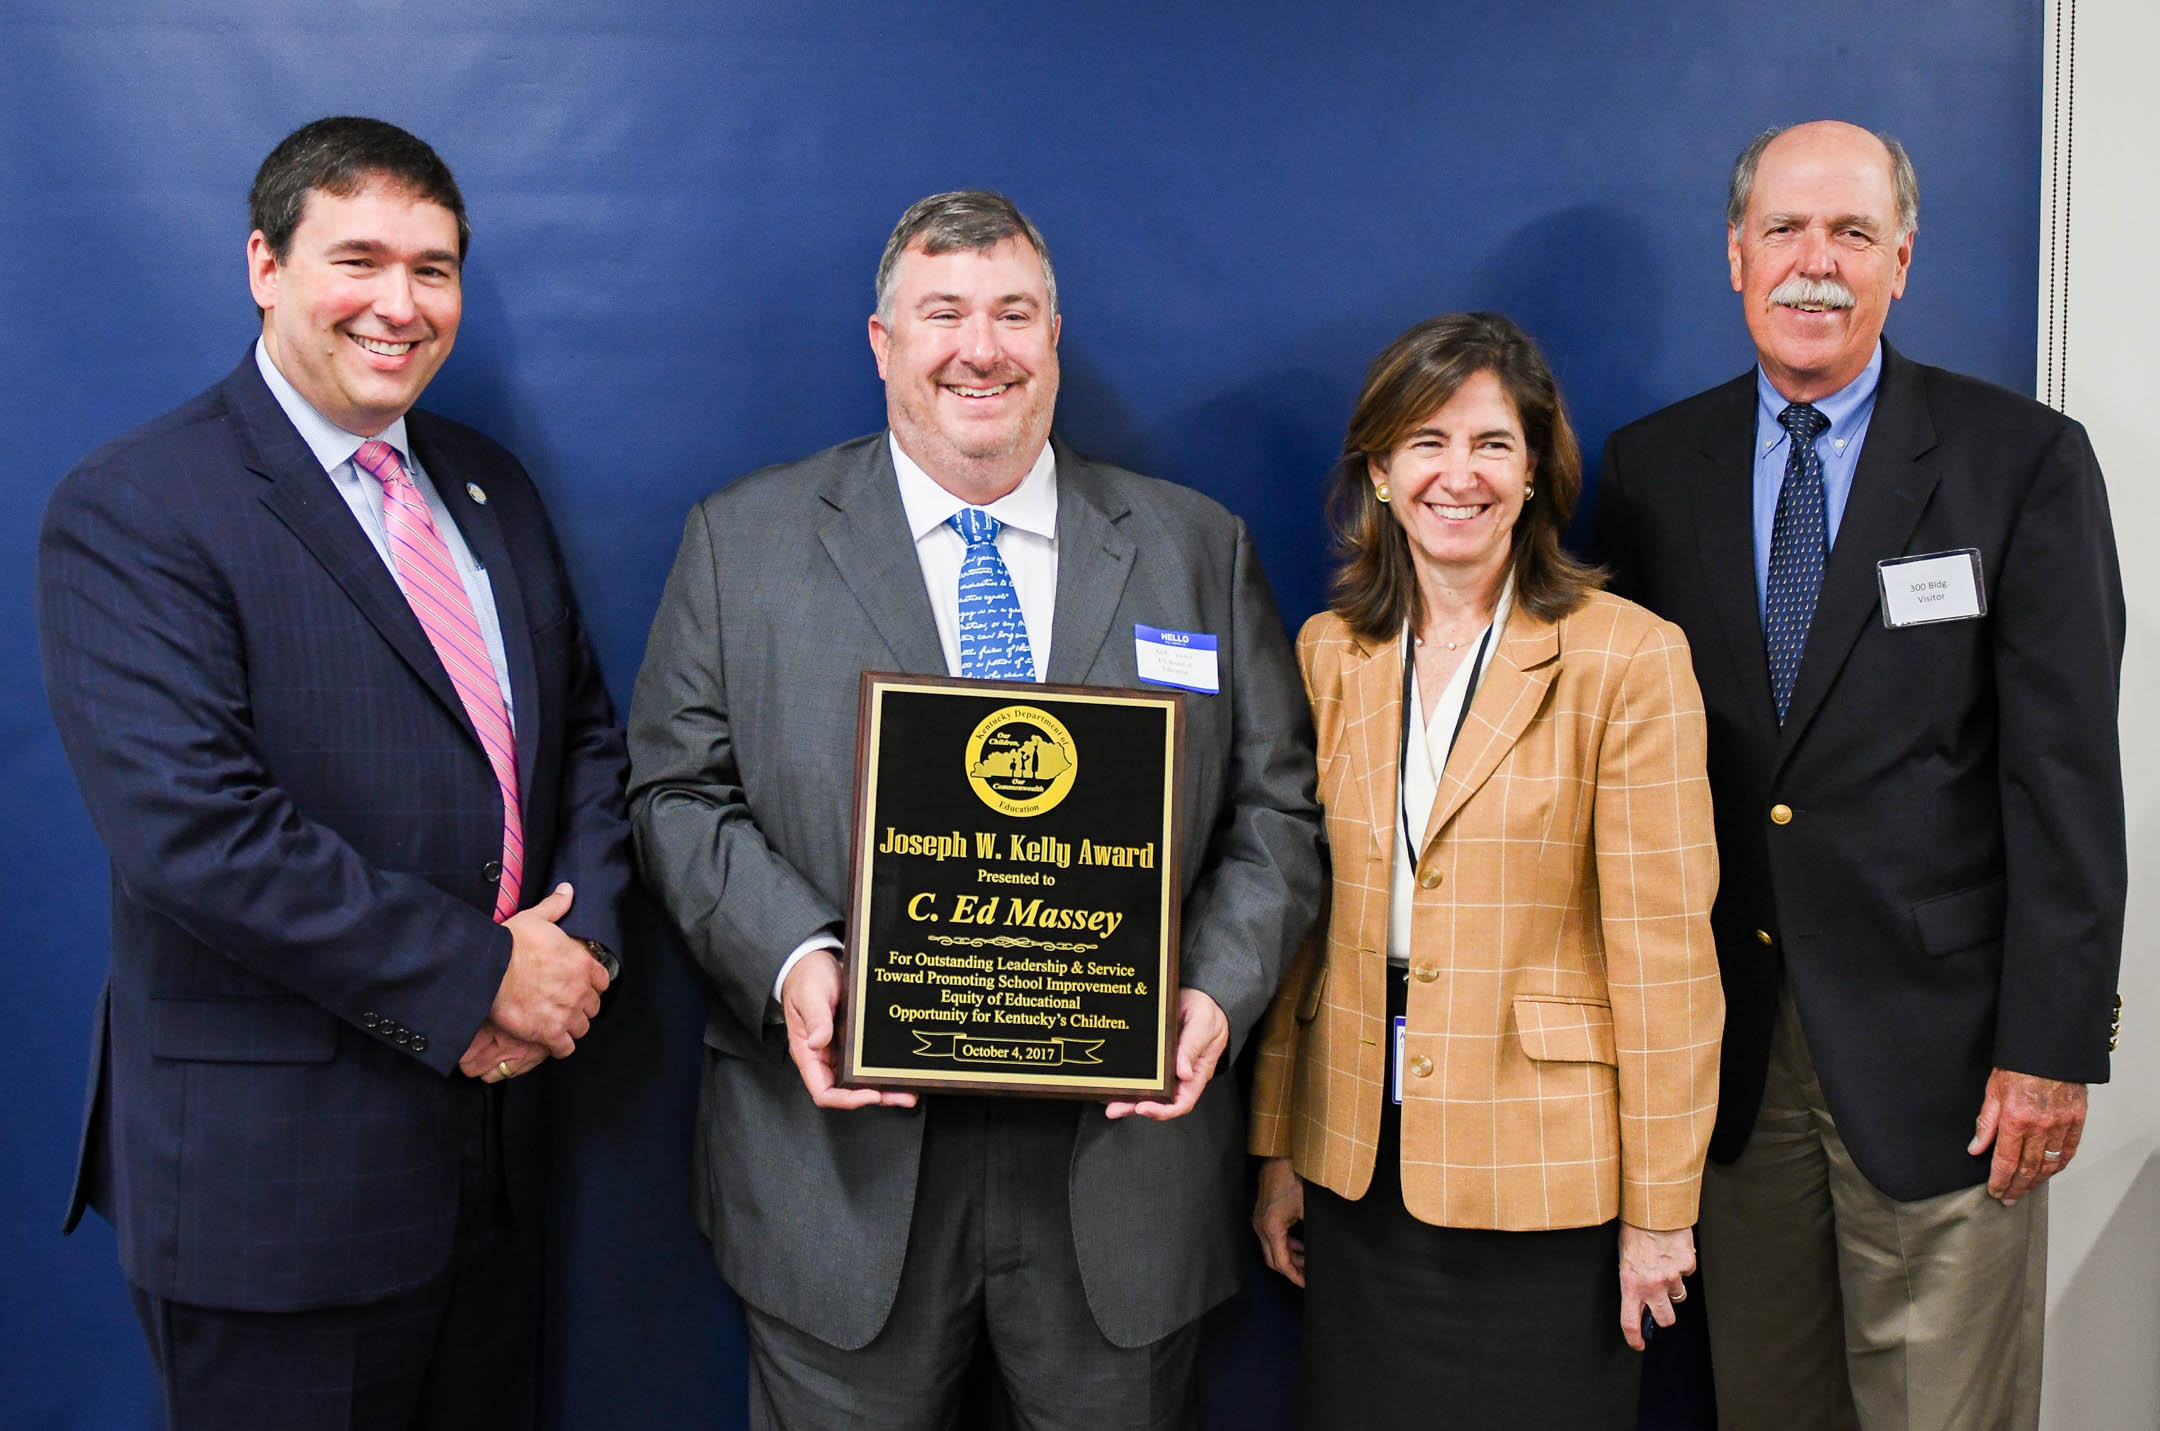 Kentucky Board of Education Chair Mary Gwen Wheeler, accompanied by Commissioner Stephen Pruitt (far left), presents the Joseph W. Kelly Award to northern Kentucky attorney C. Ed Massey (holding plaque), a long time Kenton Co. Board of Education member. The award, named for former KBE chair and businessman Joe Kelly (far right), is given to businesspeople who offer outstanding leadership and service toward promoting school improvement and equitable educational opportunities for all Kentucky children. Photo by Bobby Ellis, Oct. 4, 2017